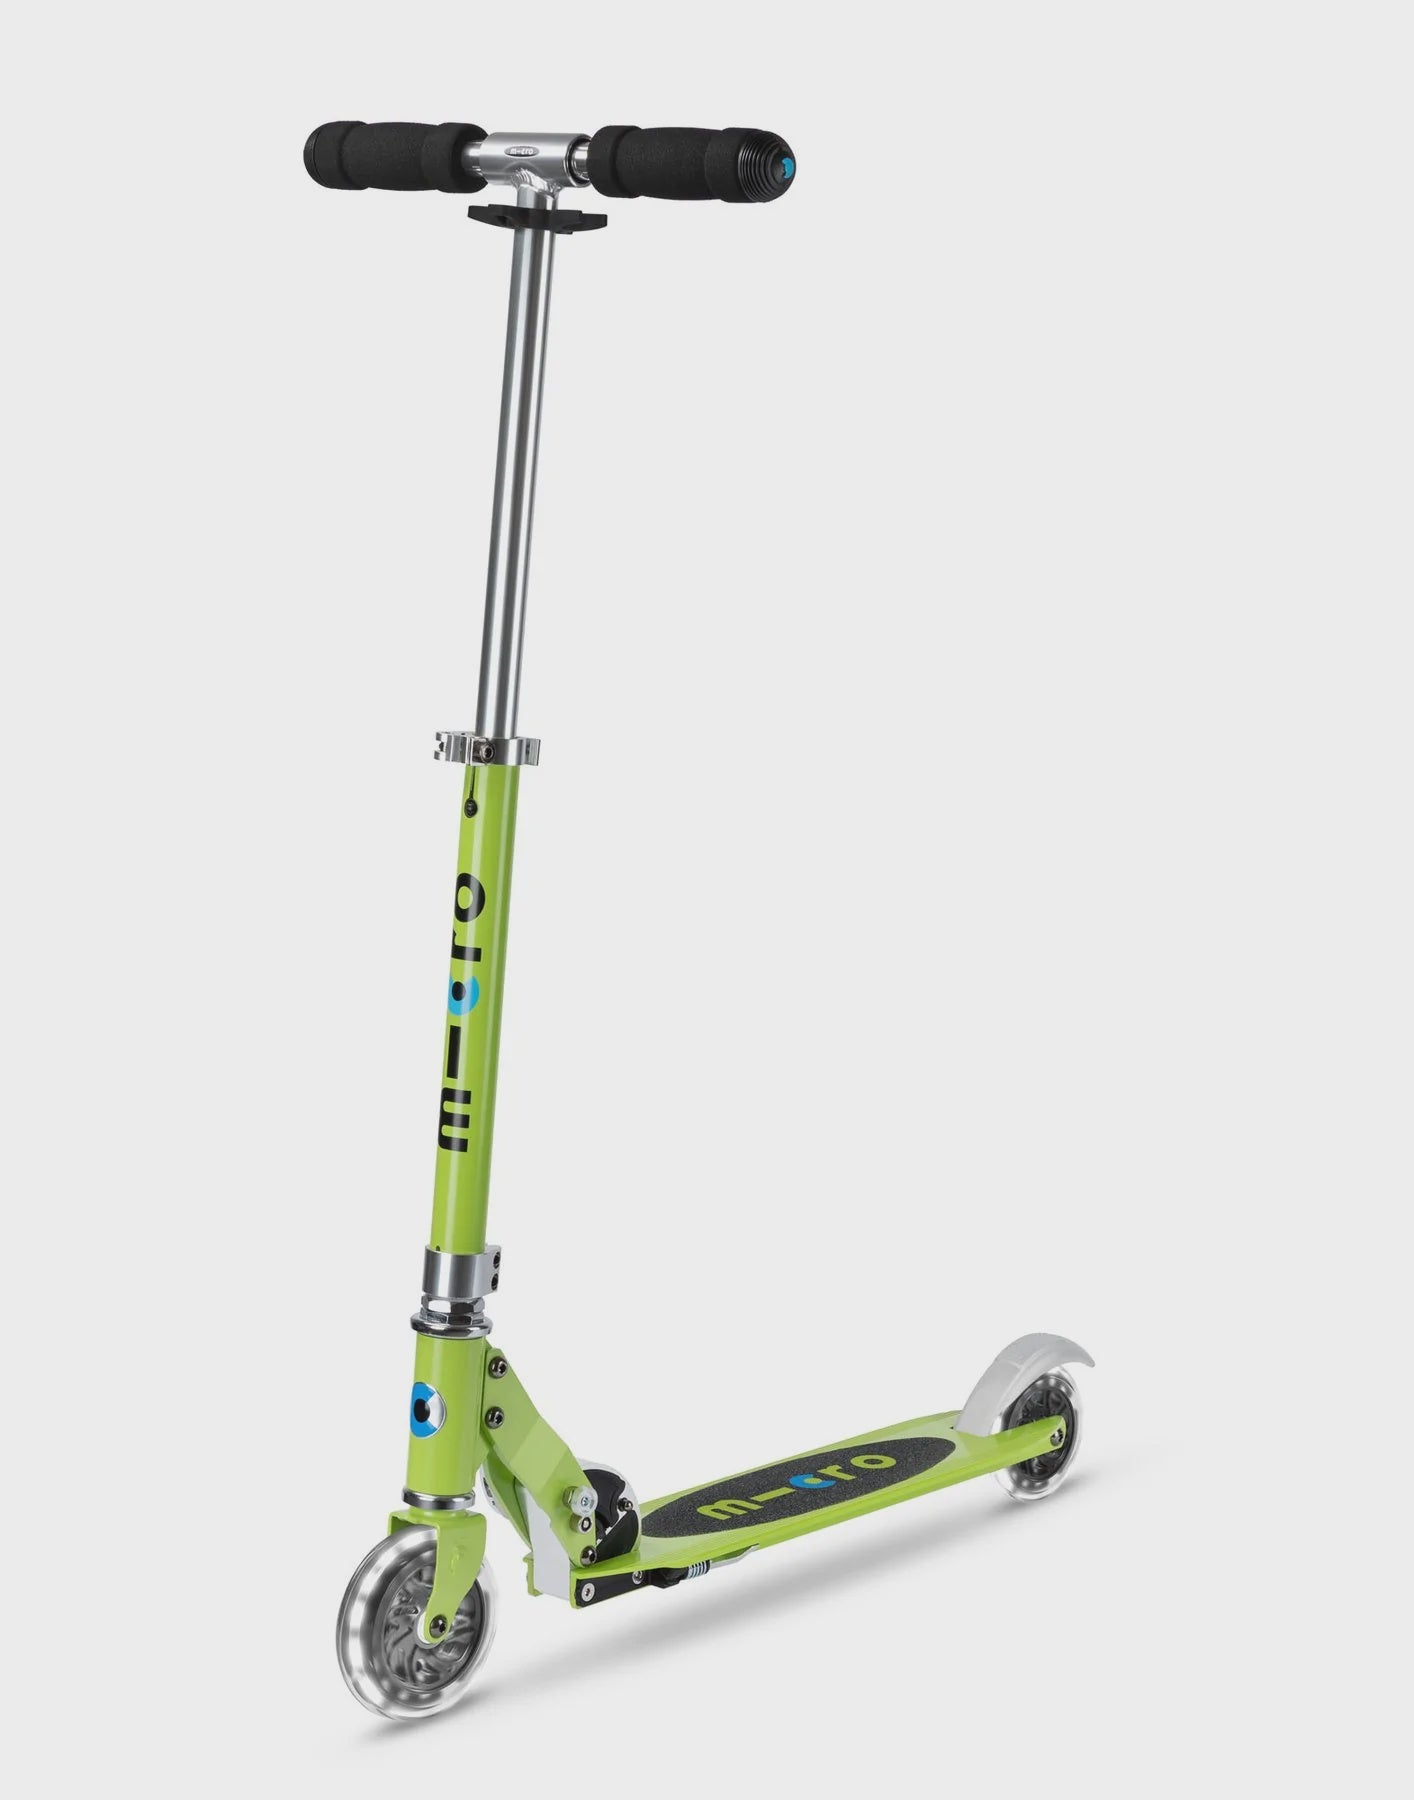 MICRO SCOOTER - Sprite LED Light Up Scooter - Chartreuse Green